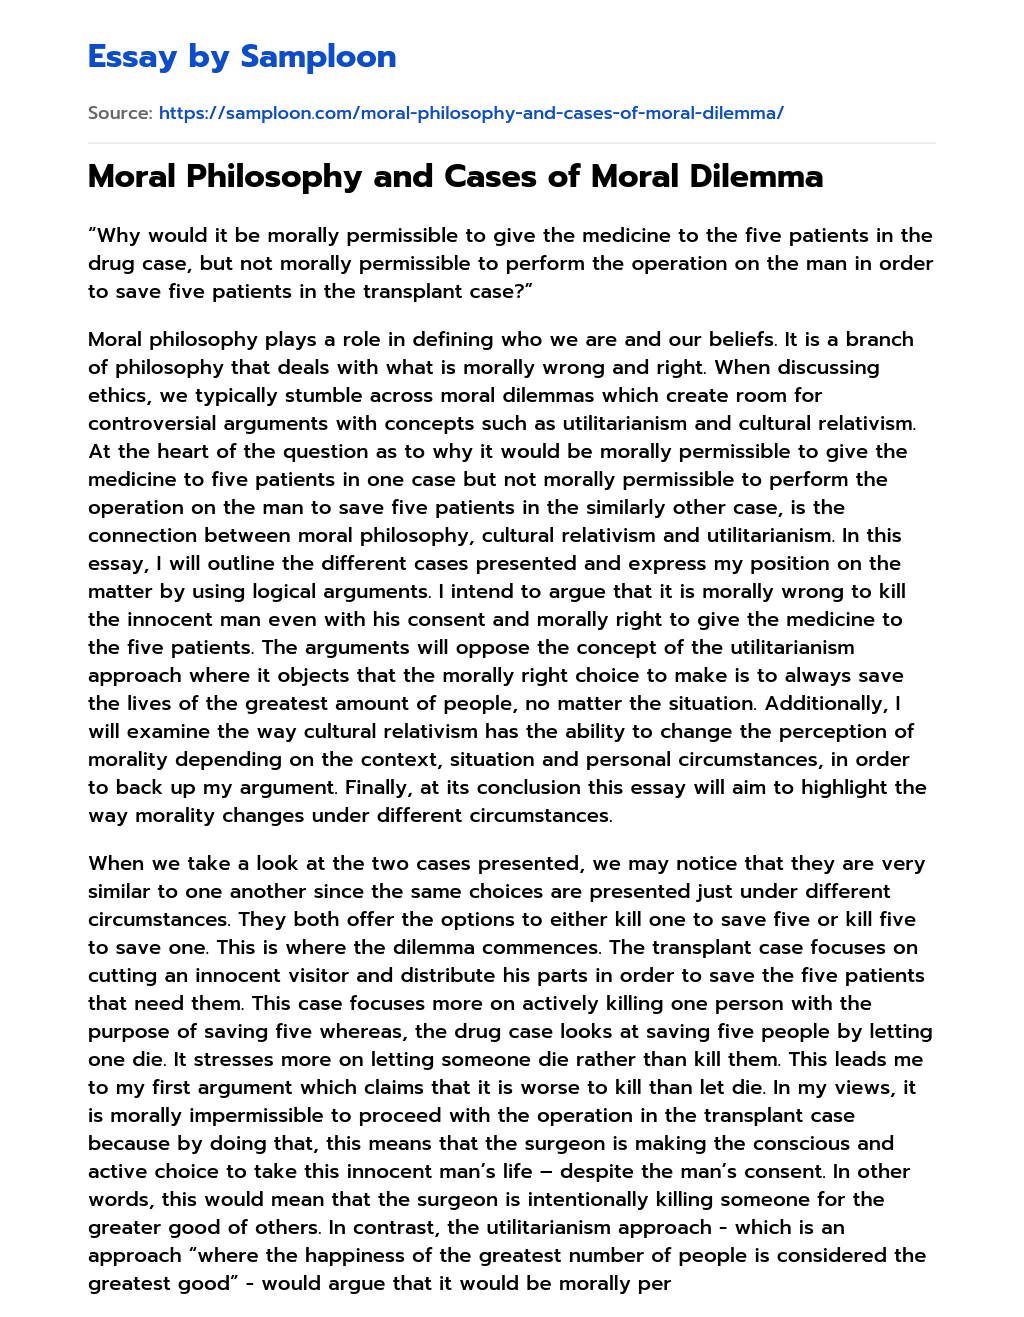 Moral Philosophy and Cases of Moral Dilemma essay